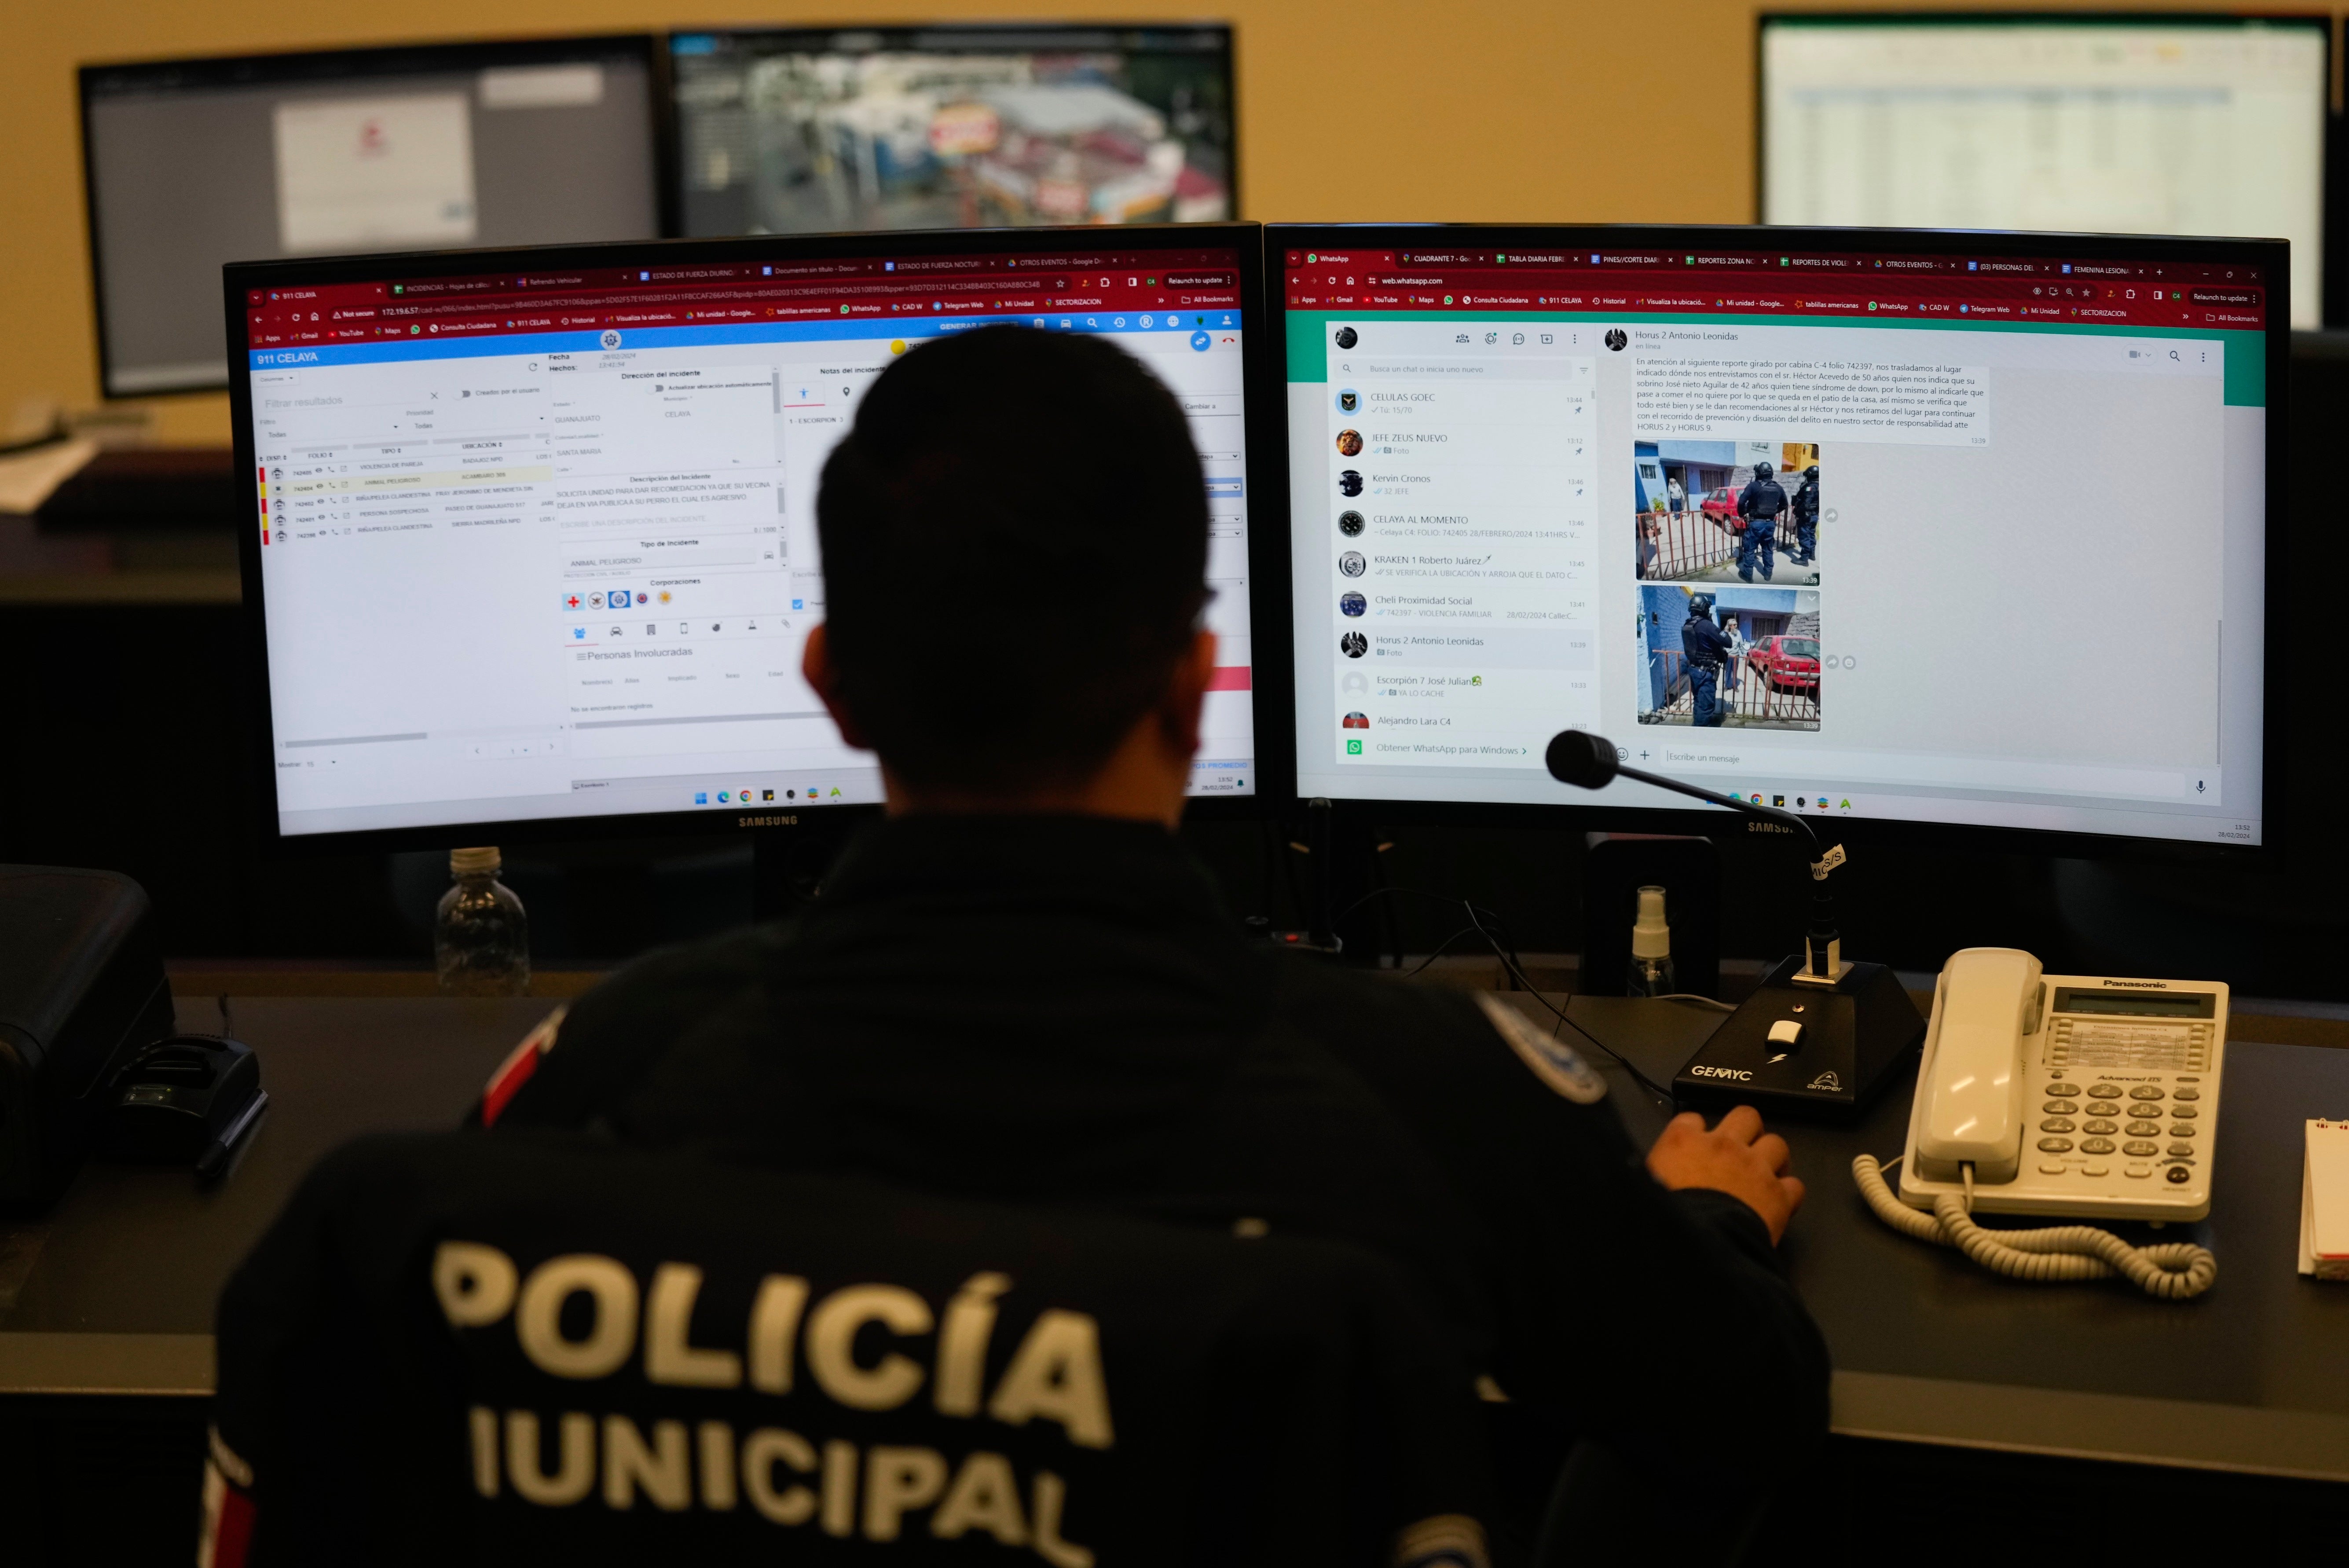 A municipal police officer monitors social media sites at a police control and monitoring center, in Celaya, Mexico